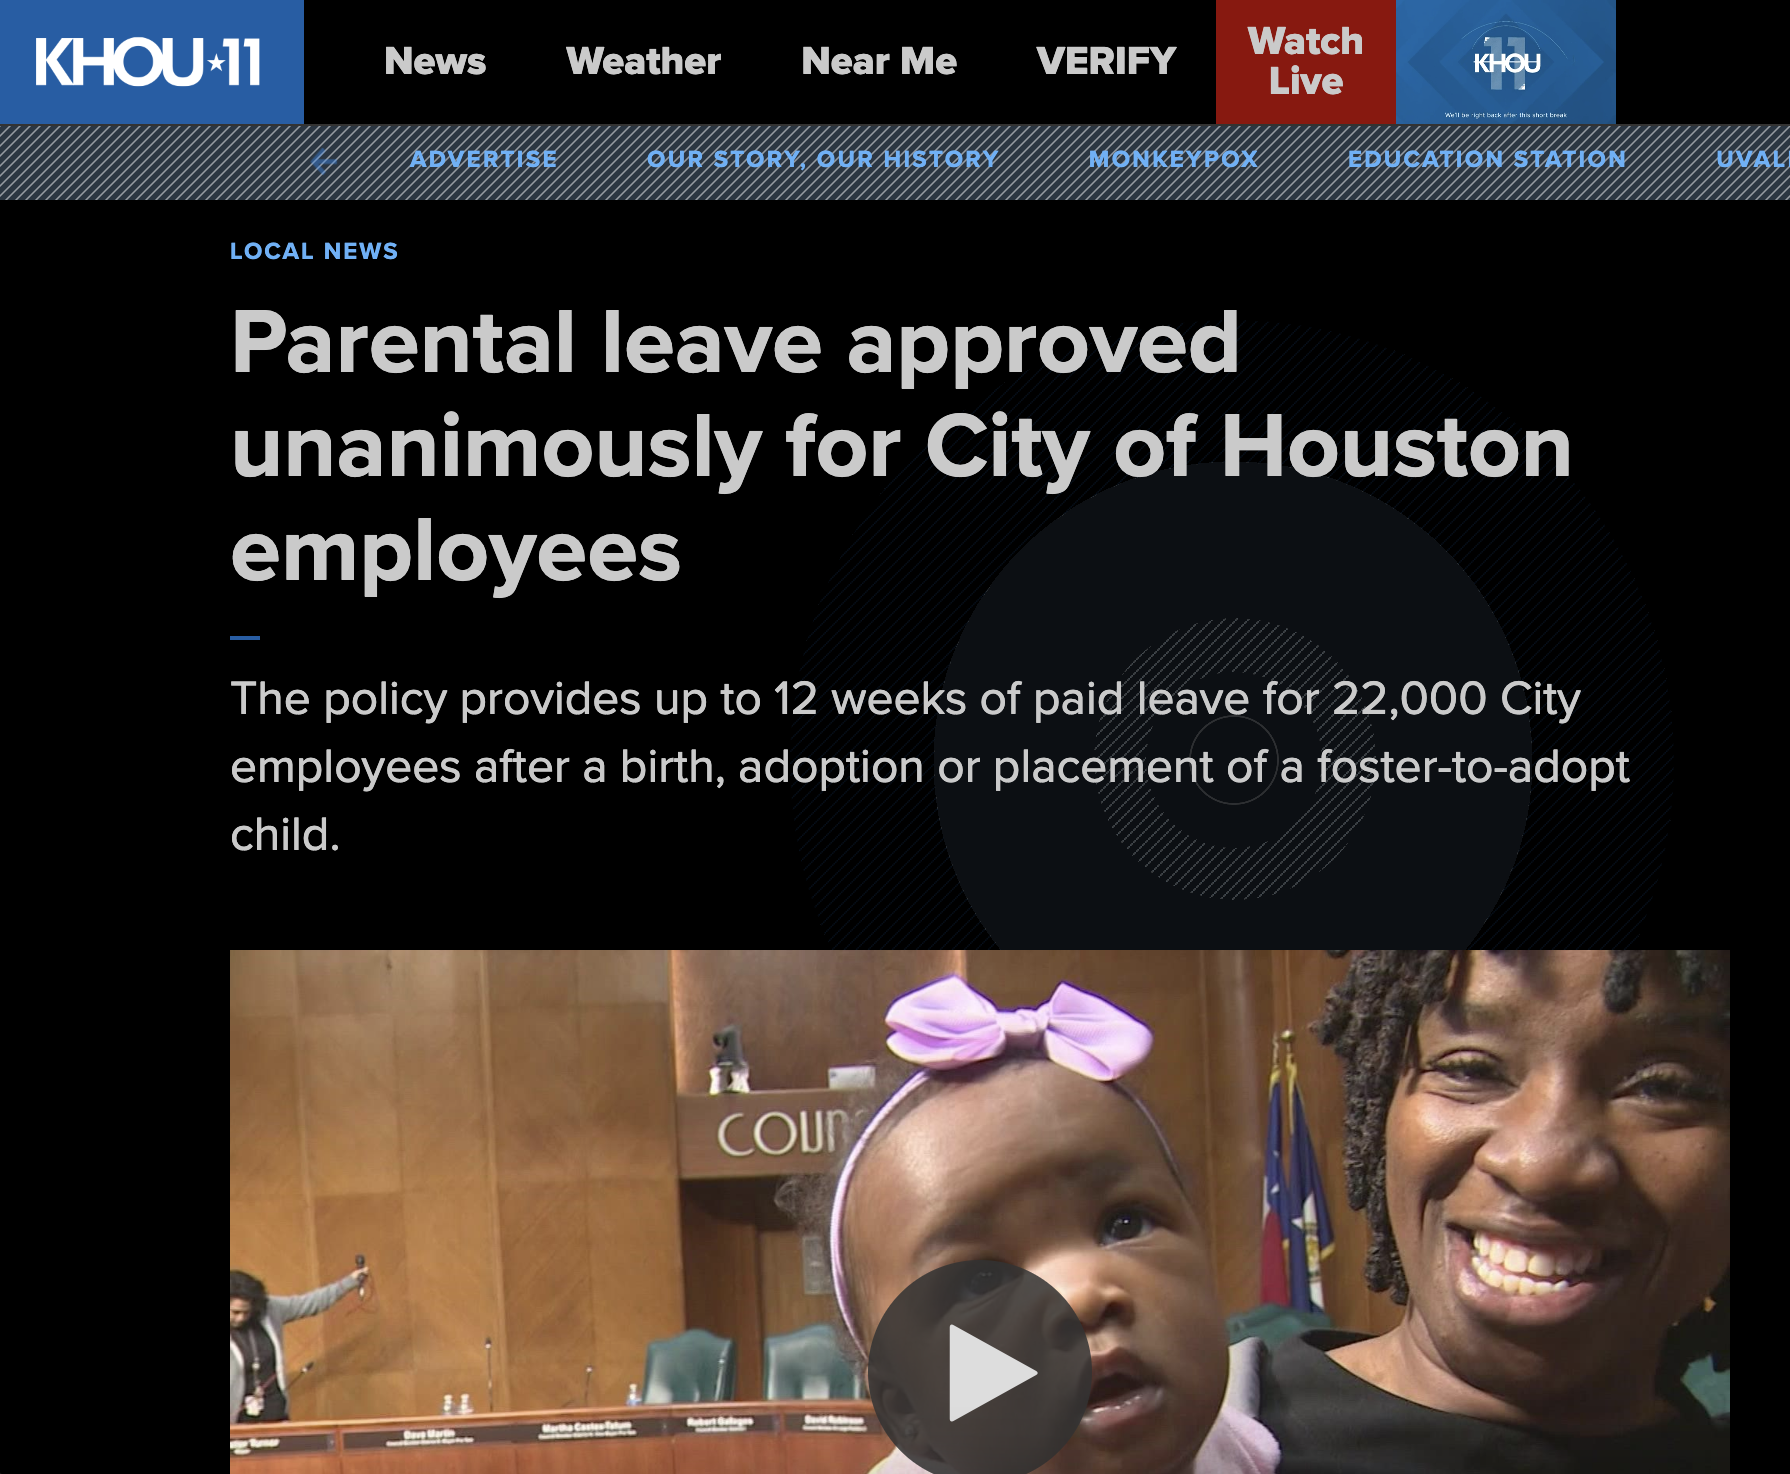 Parental leave approved unanimously for City of Houston employees